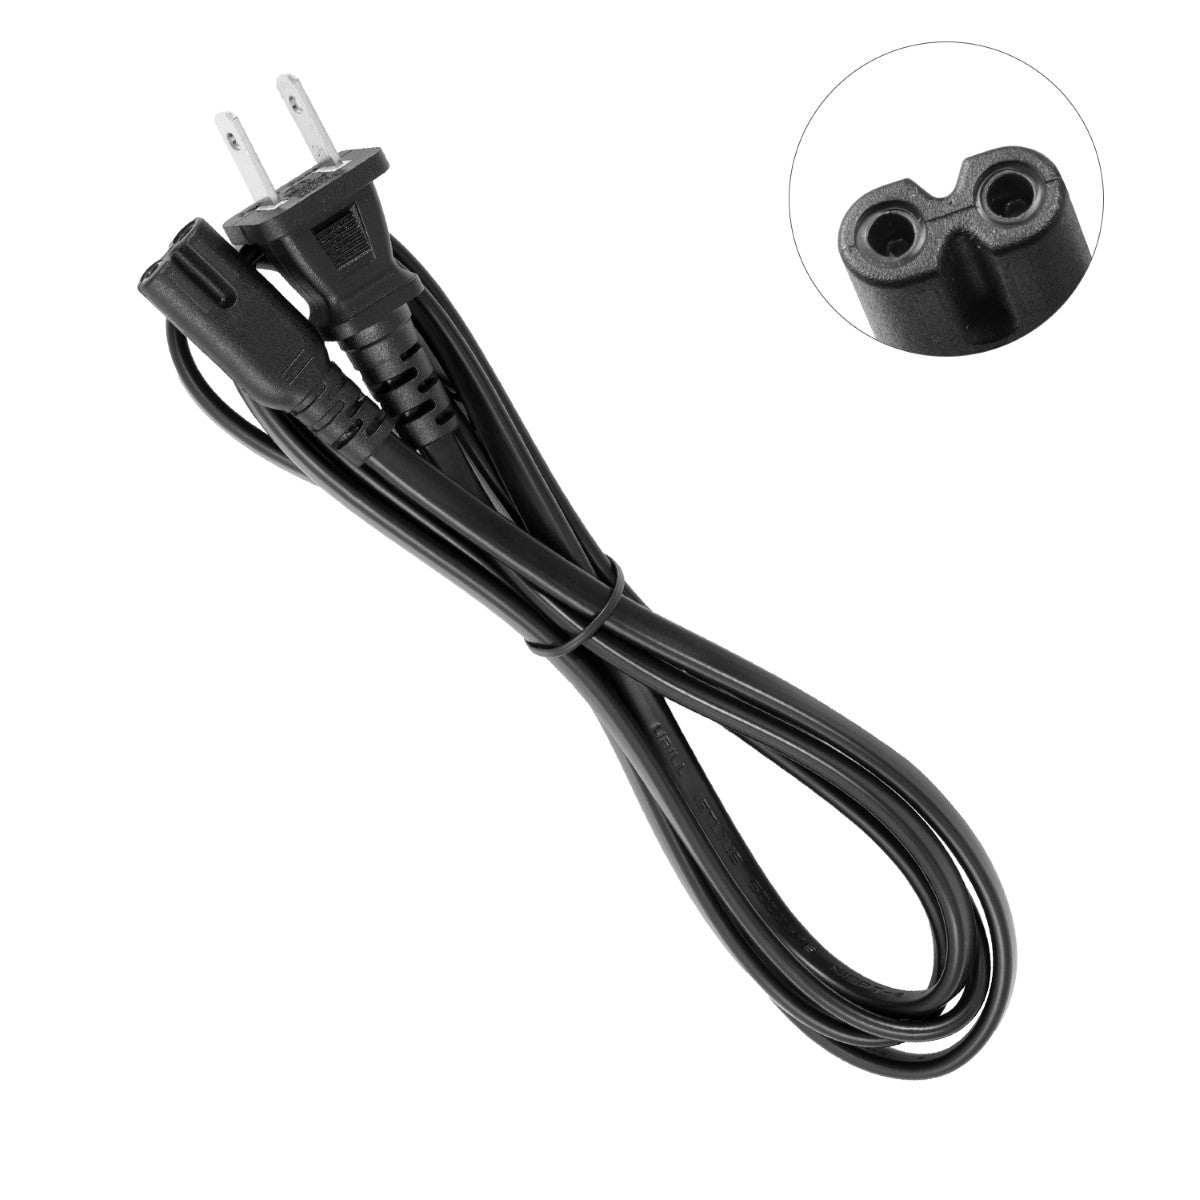 Power Cord for Sony PlayStation 2 Slim.